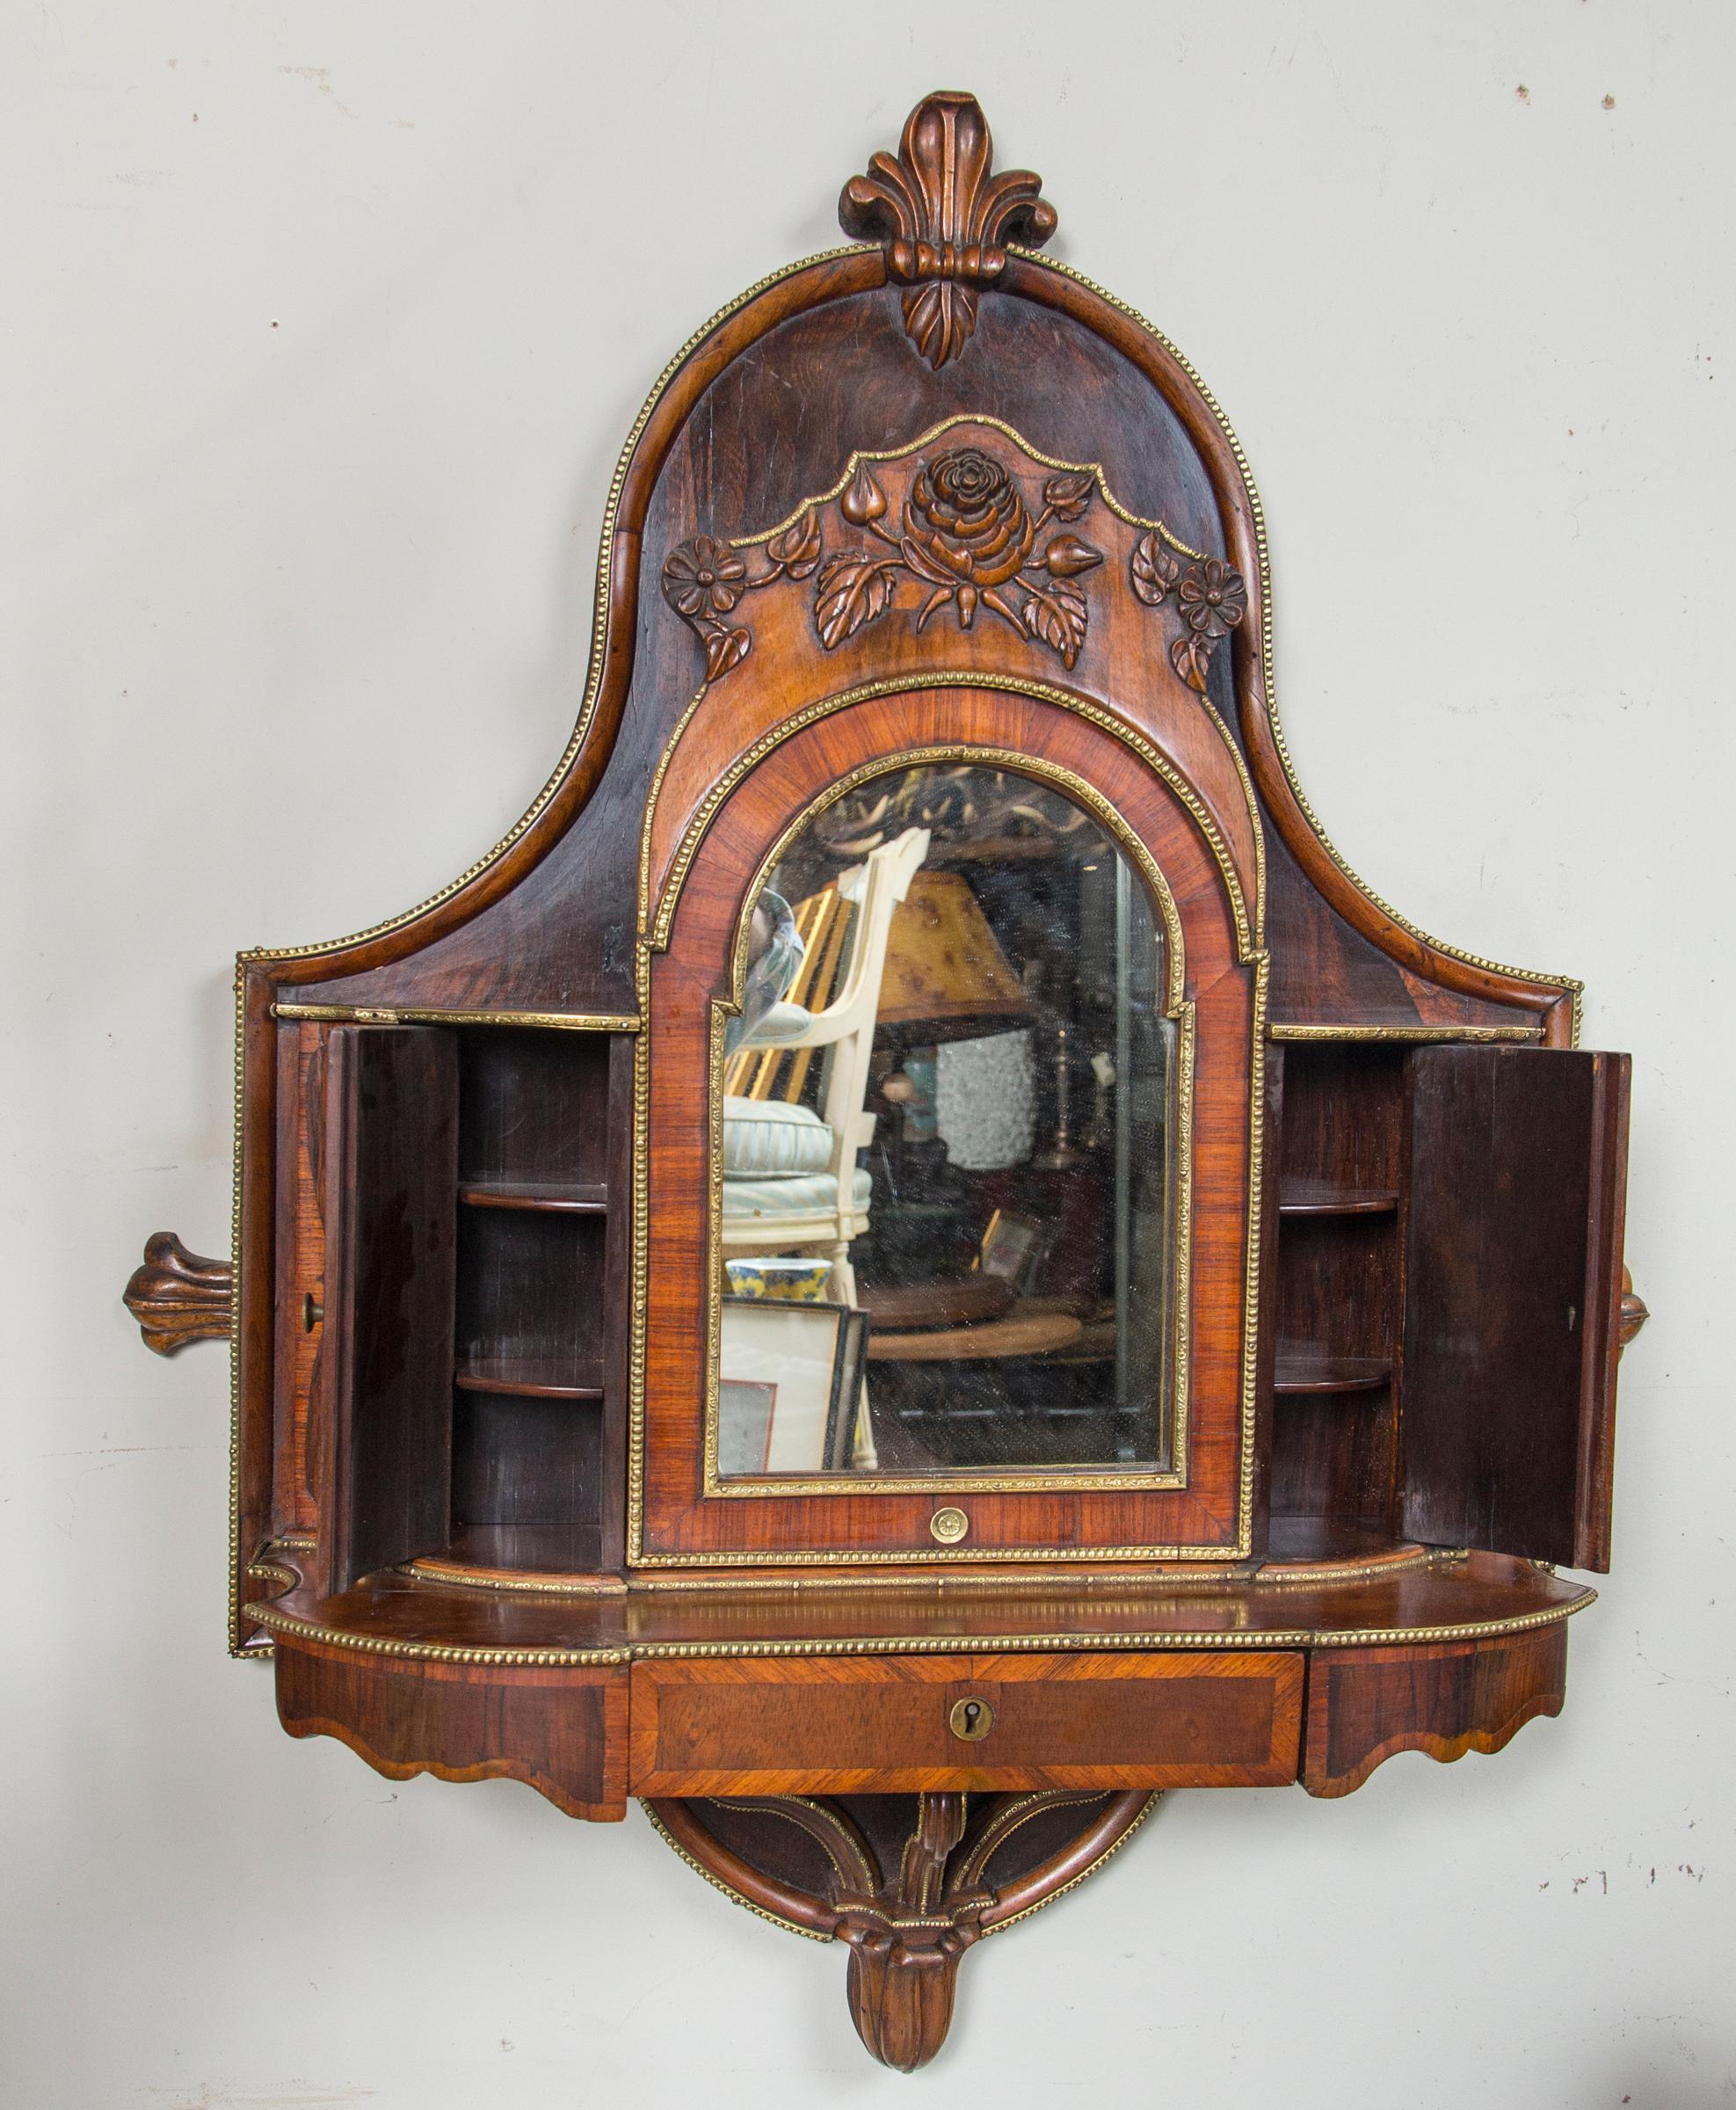 With an unusual domed shape back, surmounted by a feather form above a carved rose and leaves. The mirror tilts, but not a lot. It is flanked by two curved doors with shelves behind. There is a drawer below the mirror with compartmentalized